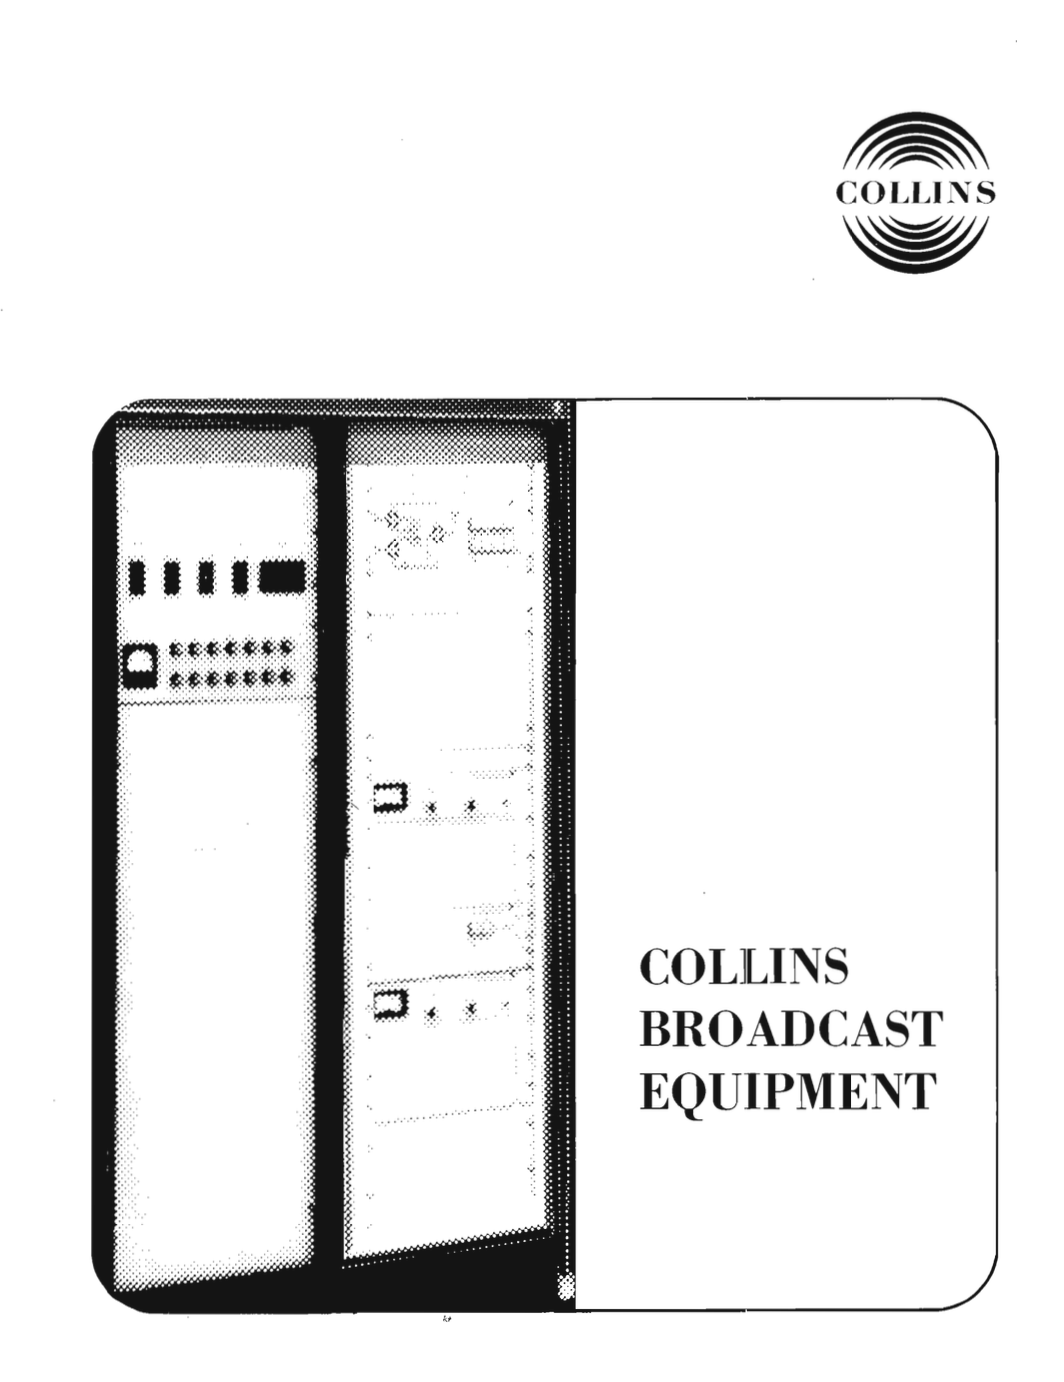 Collins - Broadcast Equipment Catalogue Number 47 (1974)